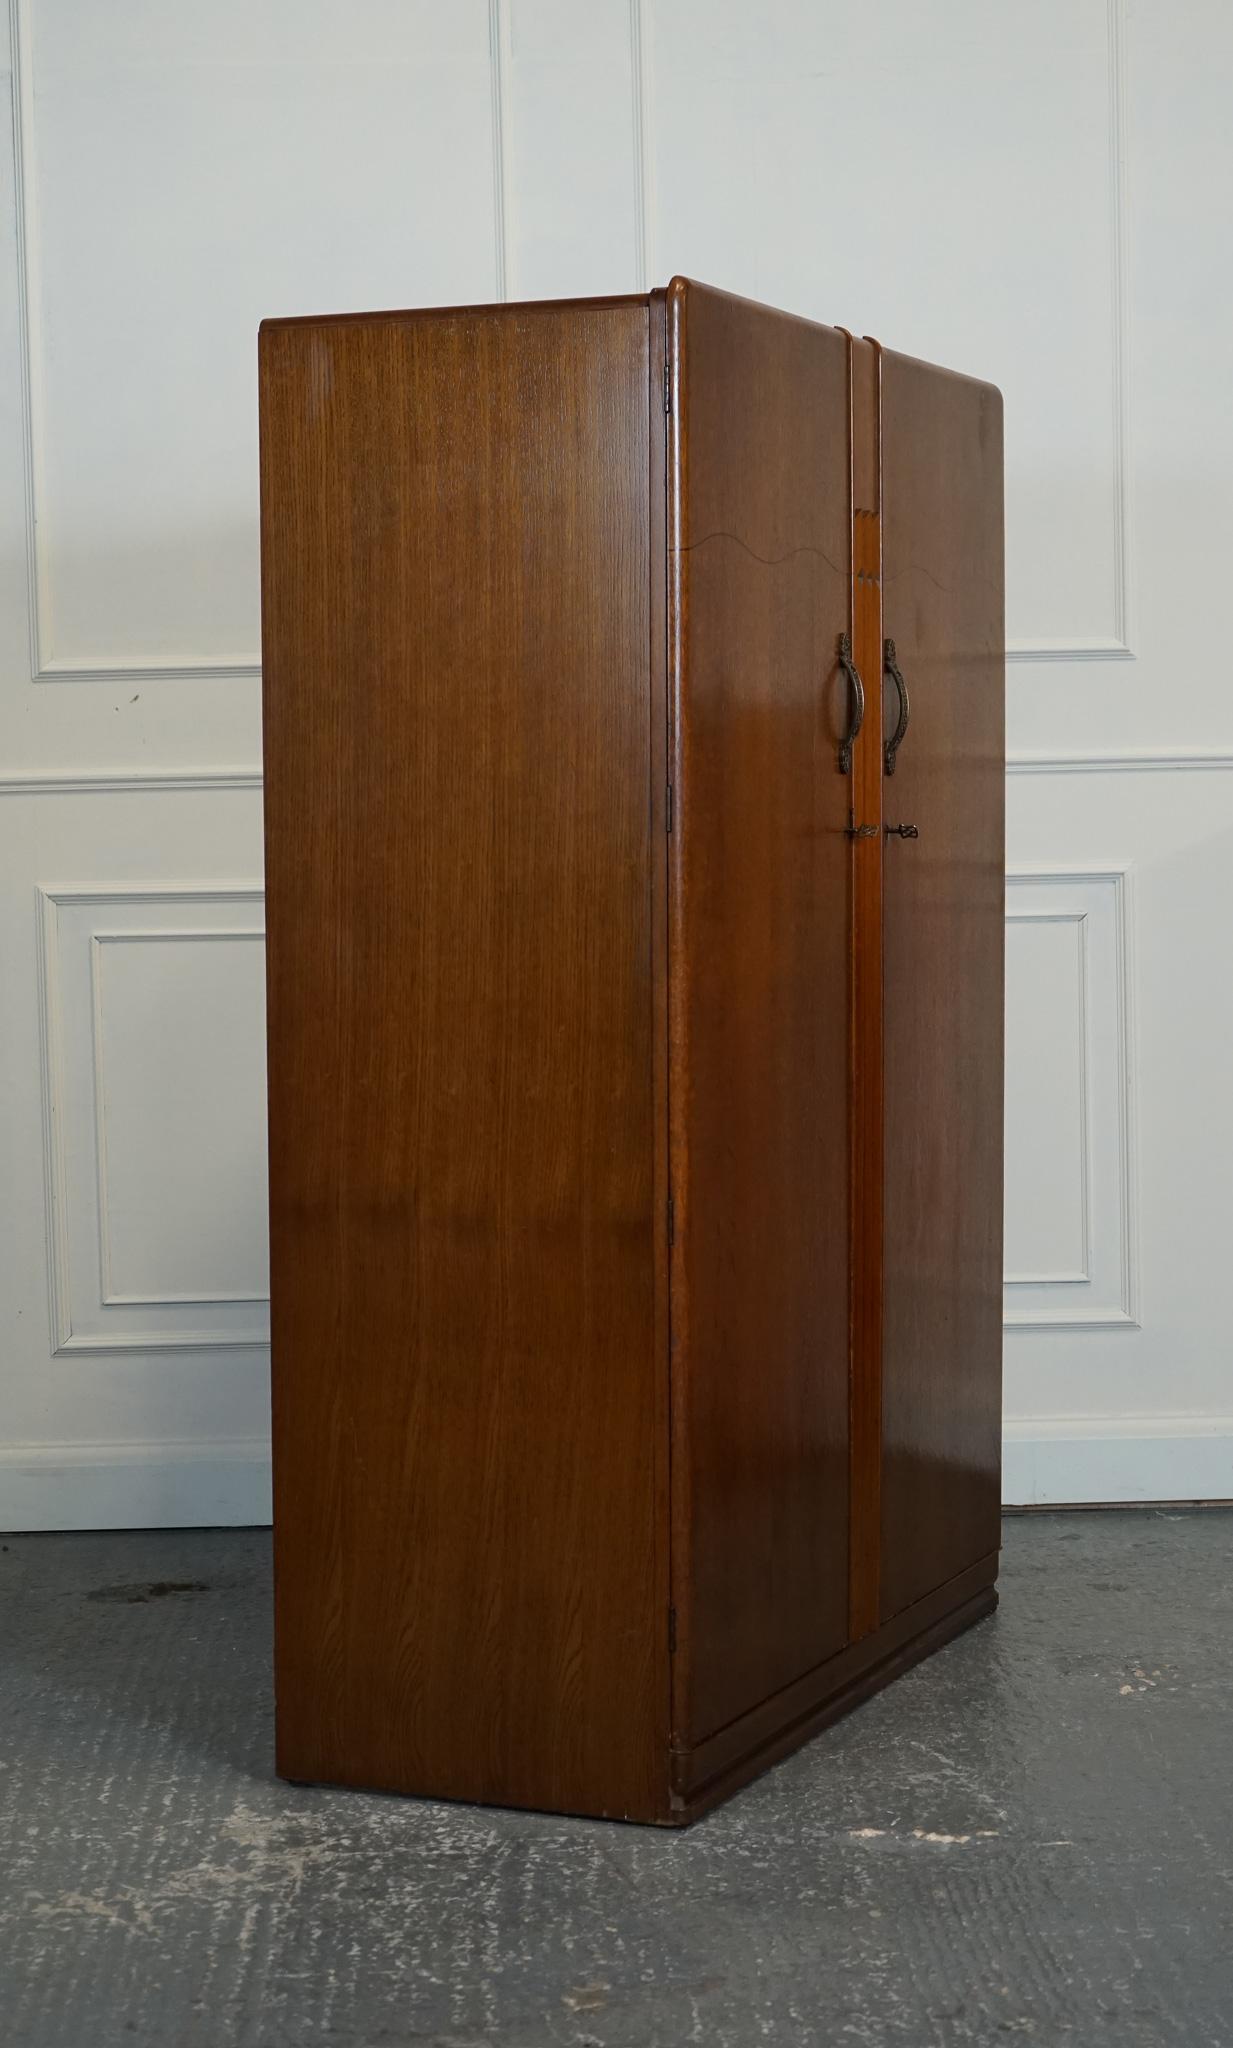 ViNTAGE ART DECO TWO DOOR WARDROBE BY LEBUS FURNITURE J1 In Good Condition For Sale In Pulborough, GB